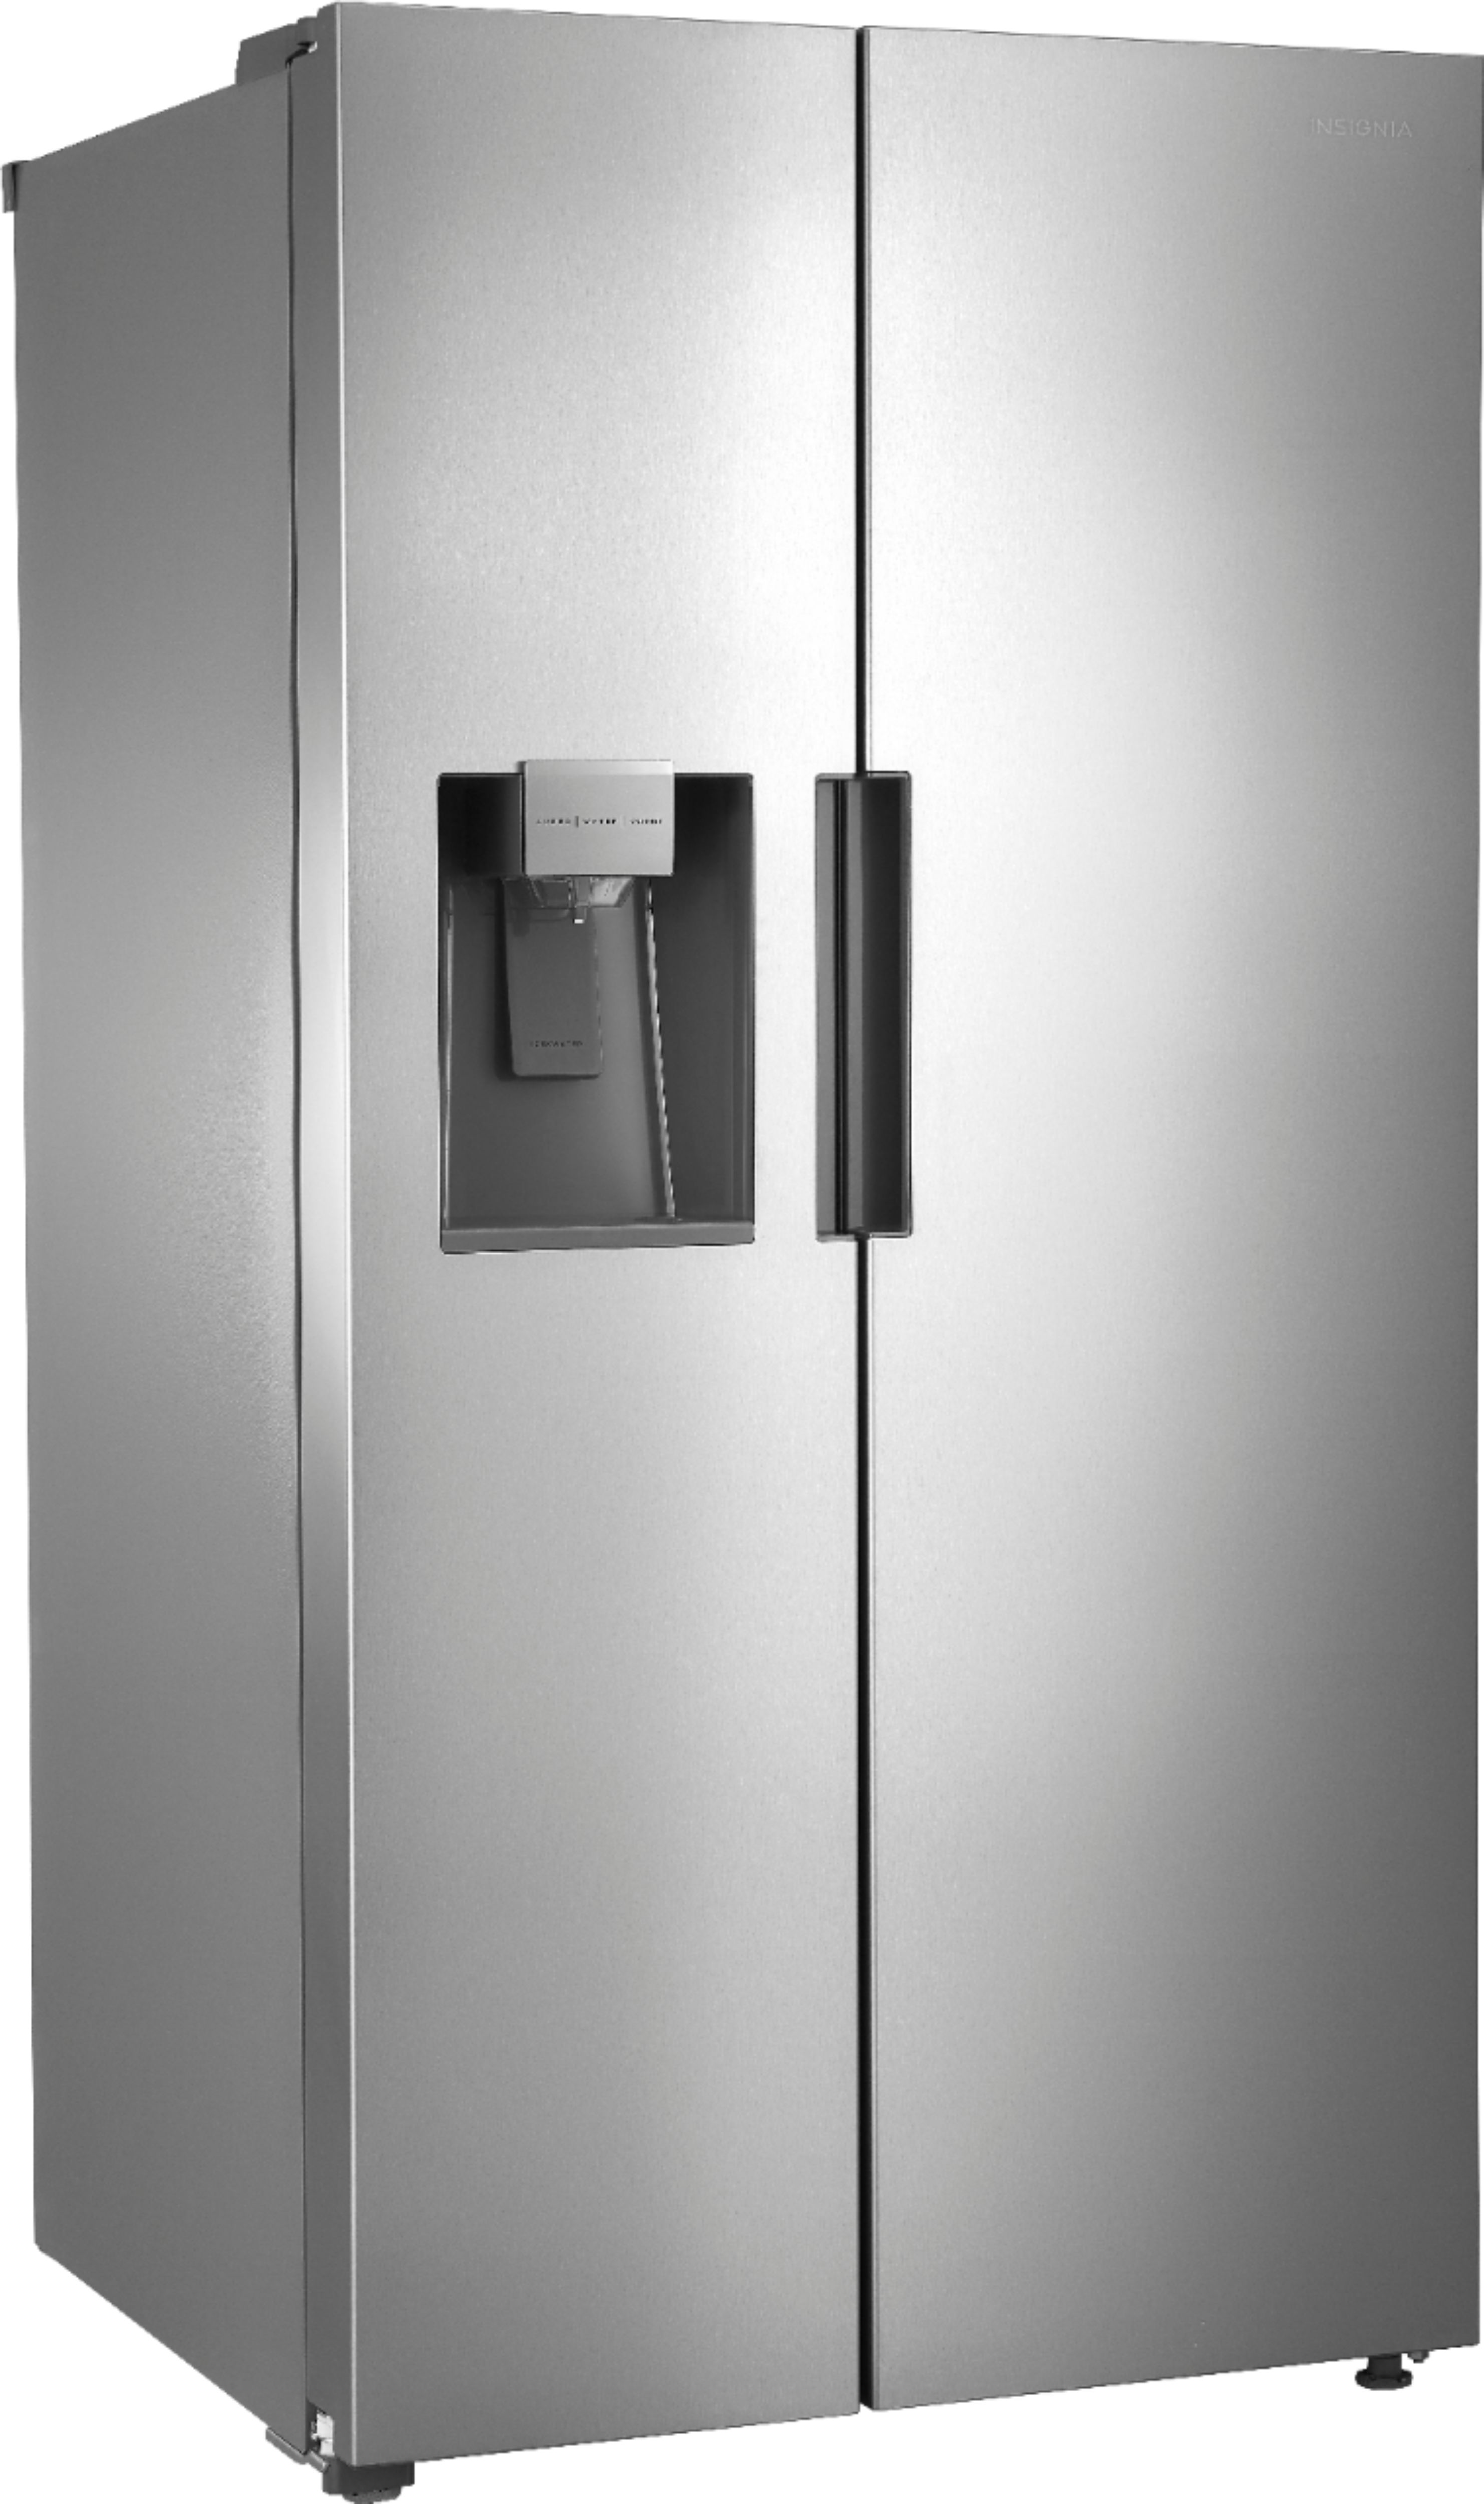 Angle View: Insignia™ - 26 5/16 Cu. Ft. Side-by-Side Refrigerator - Stainless steel